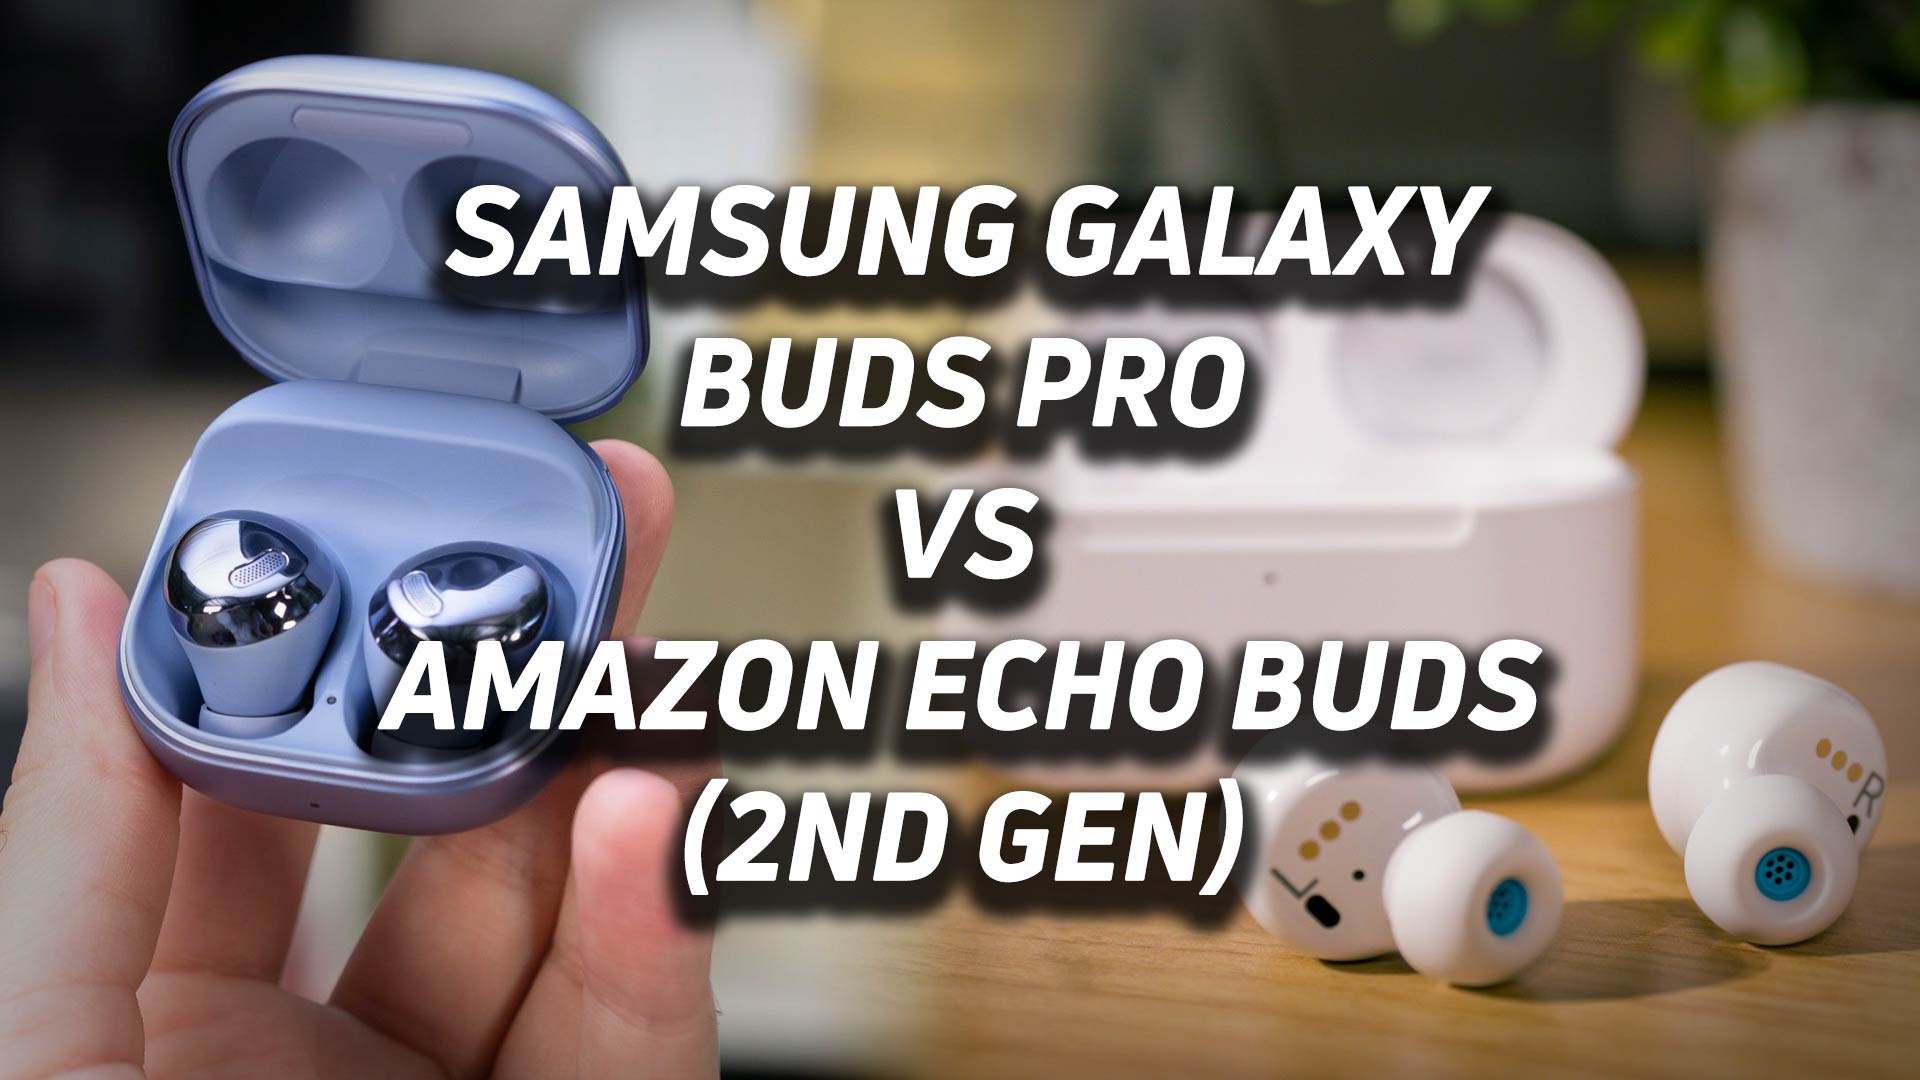 A blended image of the Samsung Galaxy Buds Pro and Amazon Echo Buds (2nd Gen) noise canceling true wireless earbuds with the versus text overlaid.